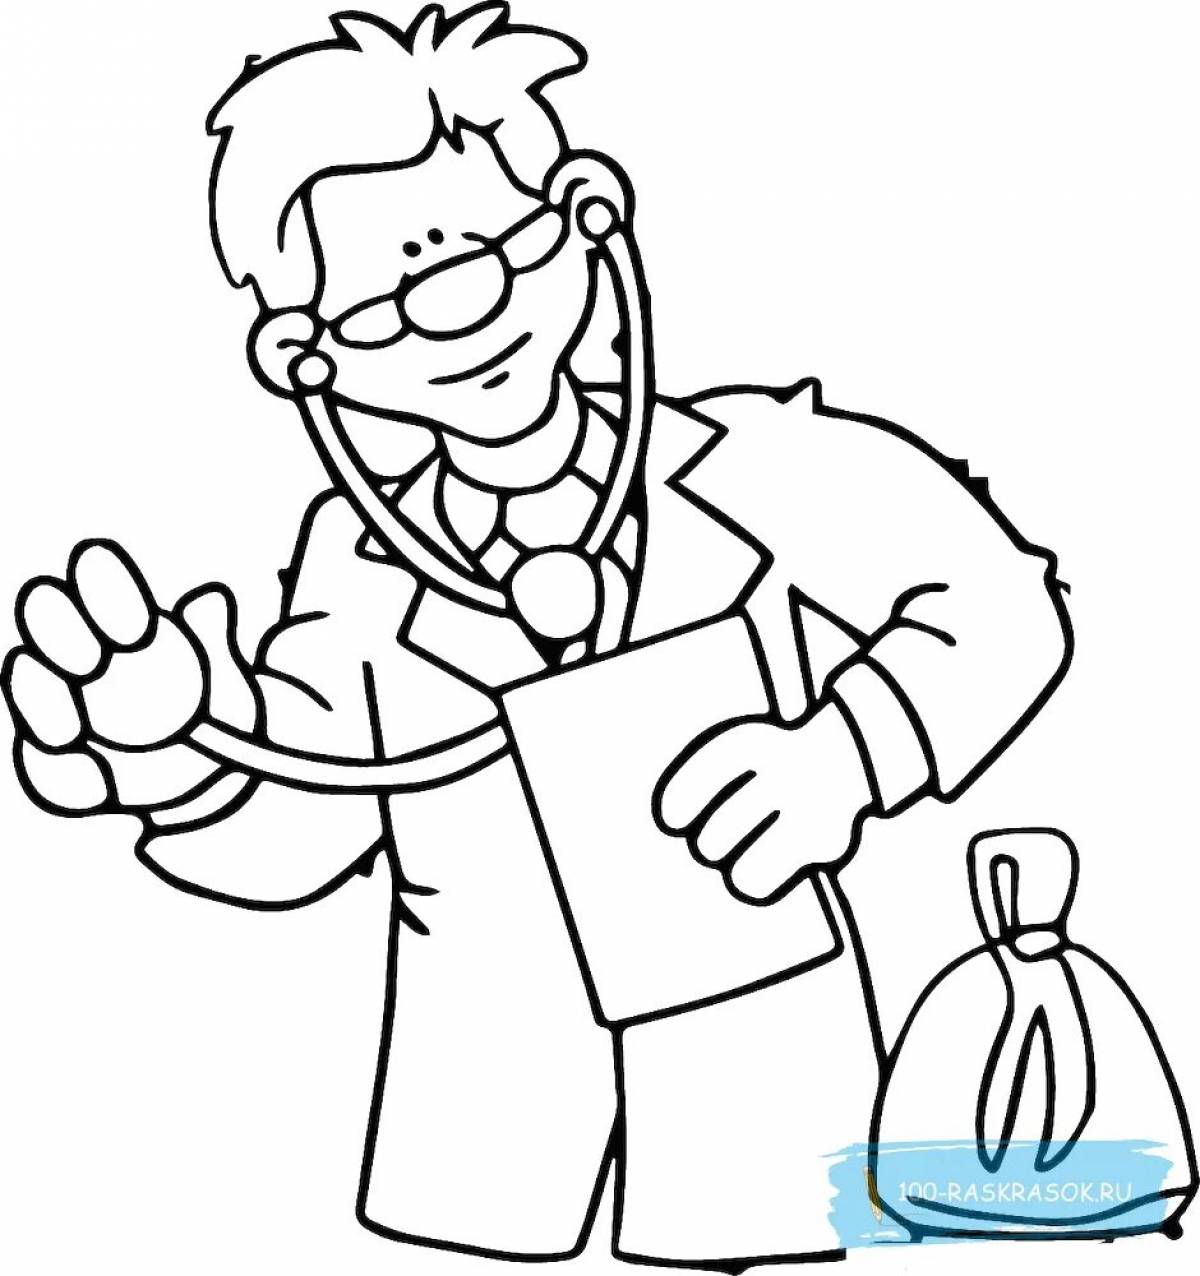 Colorful doctor doctor coloring page